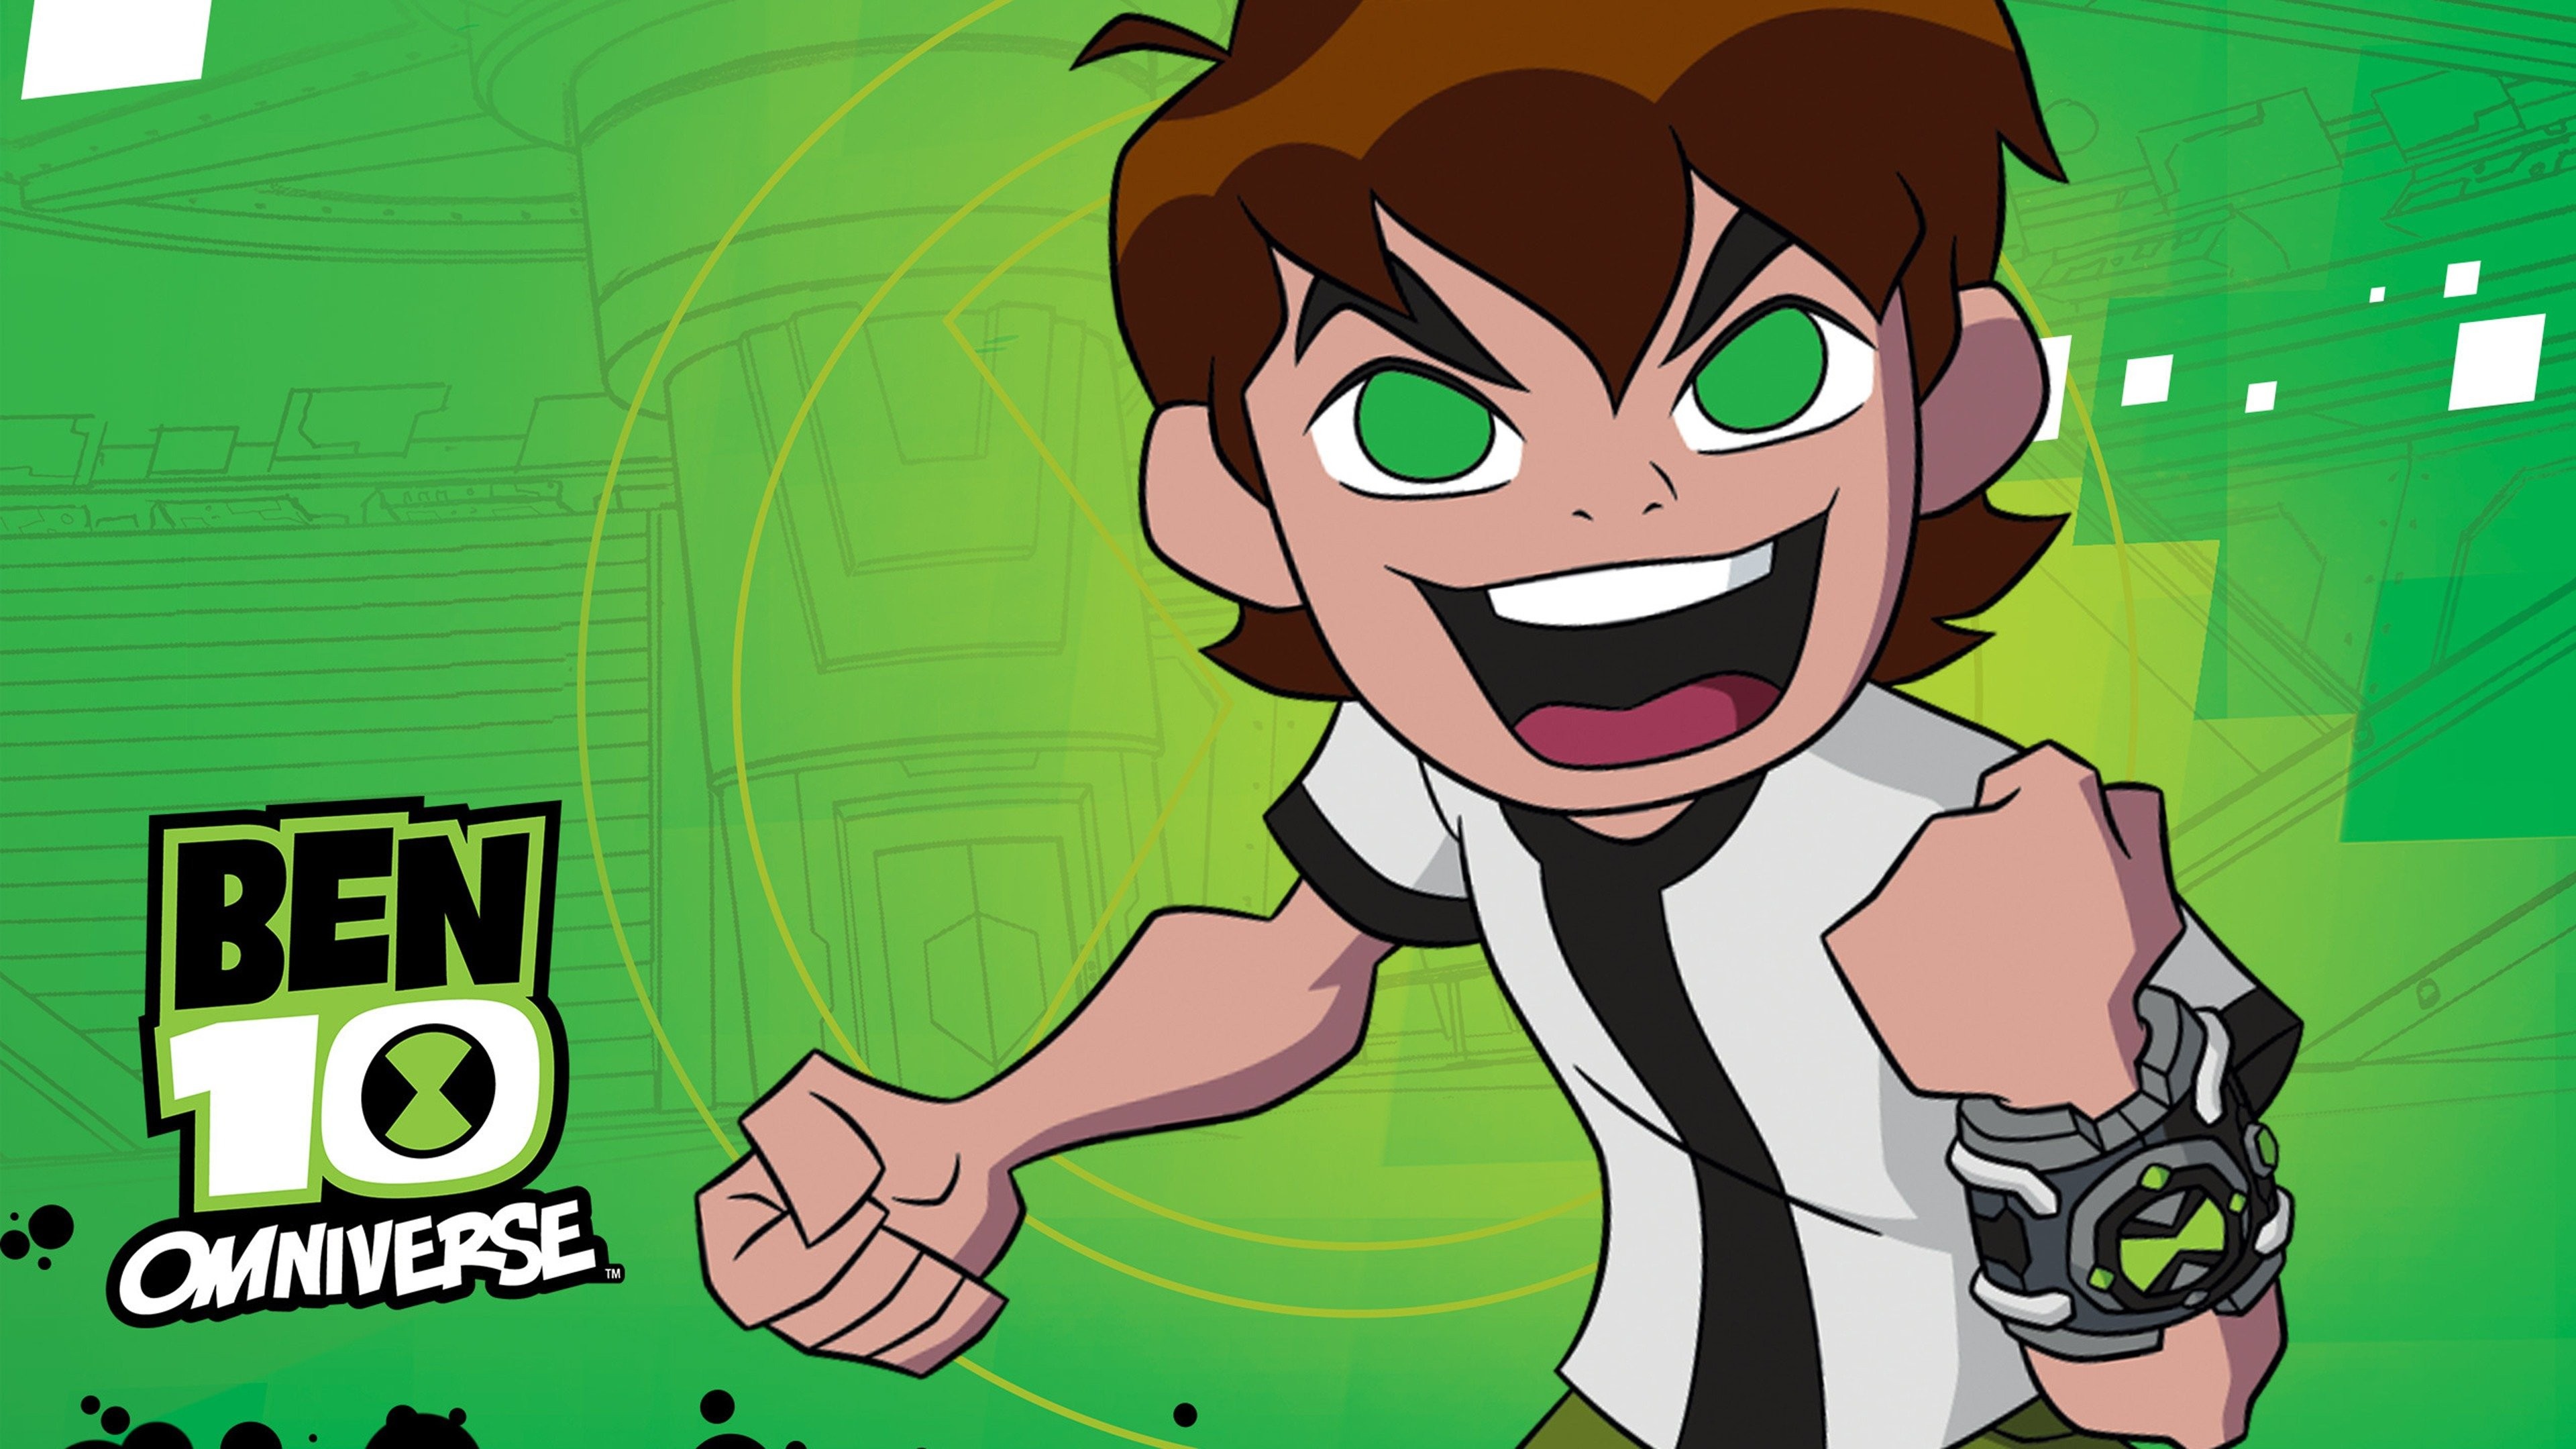 Ben 10 Omniverse The Complete Series 8 Seasons with 80 Episodes on